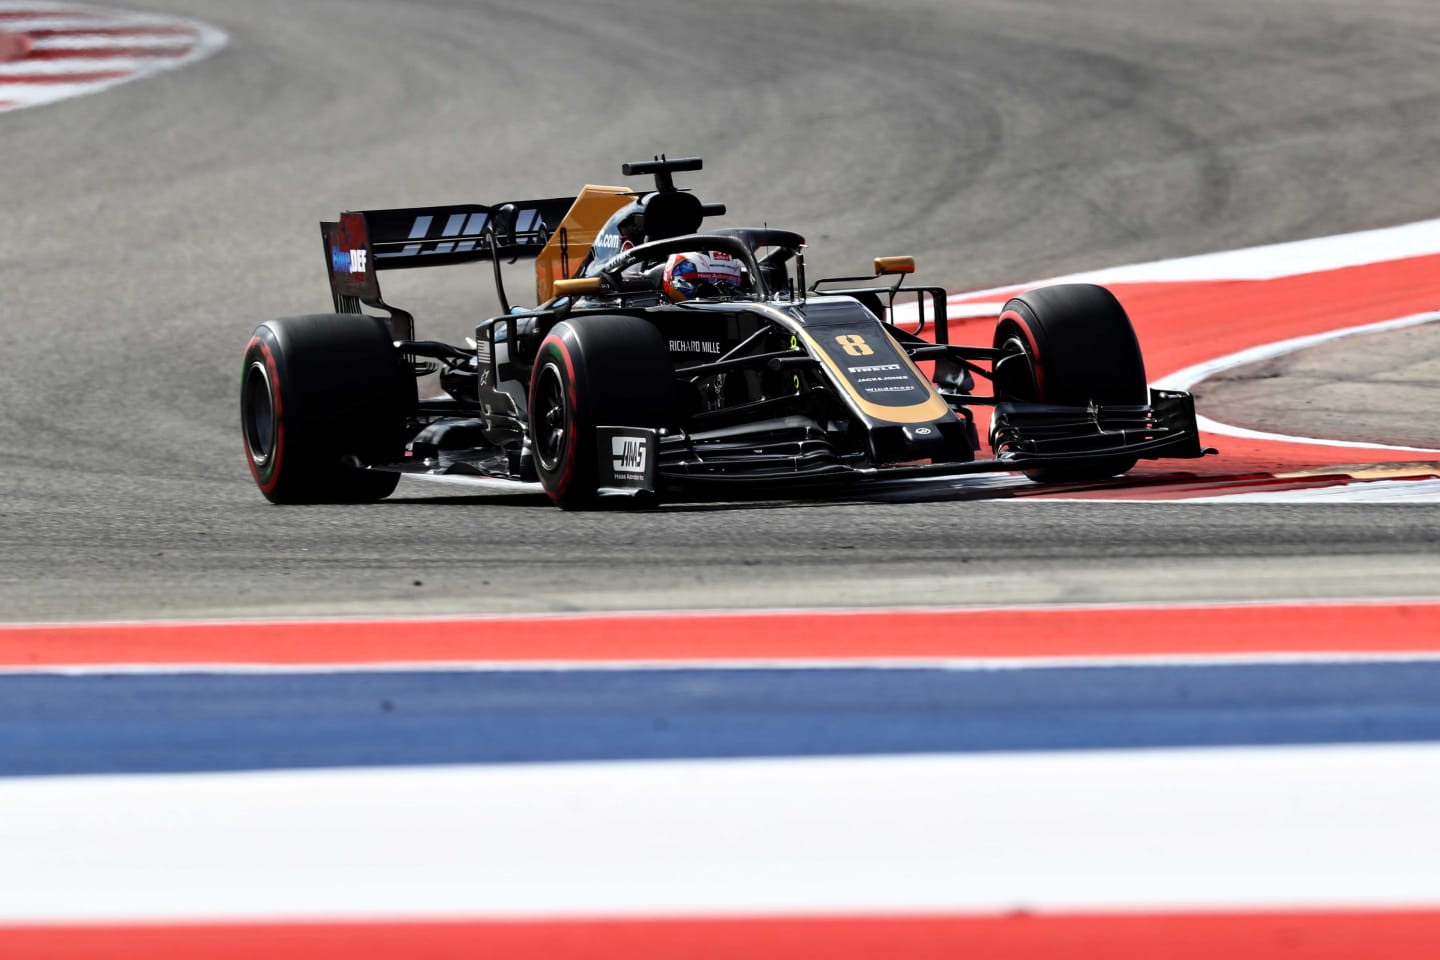 AUSTIN, TEXAS - NOVEMBER 02: Romain Grosjean of France driving the (8) Haas F1 Team VF-19 Ferrari on track during final practice for the F1 Grand Prix of USA at Circuit of The Americas on November 02, 2019 in Austin, Texas. (Photo by Mark Thompson/Getty Images)